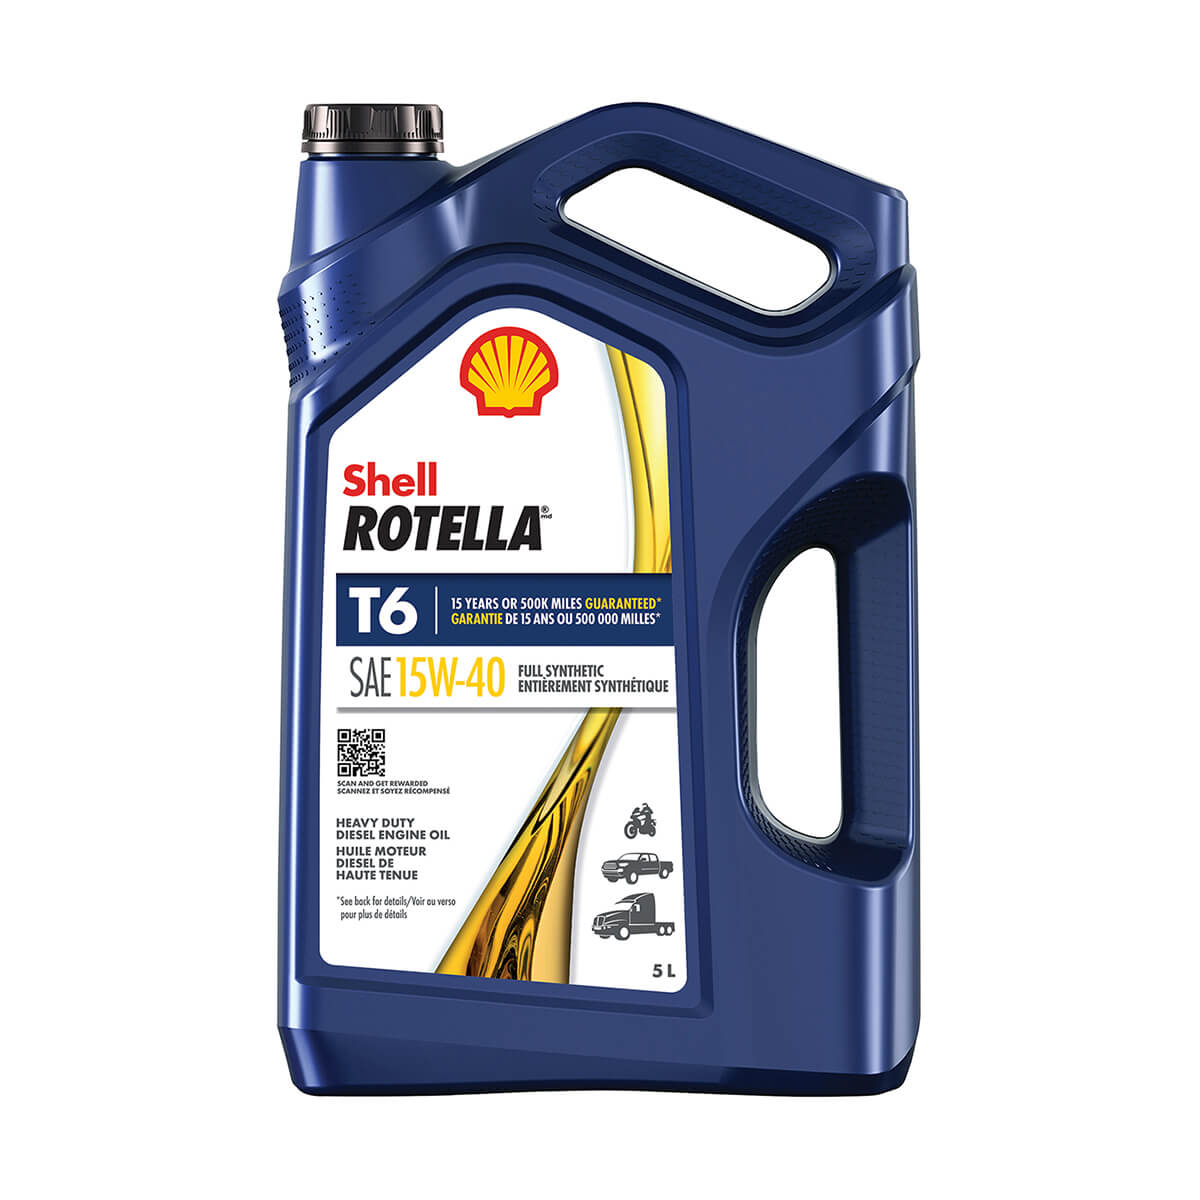 Shell Rotella® T6 15W-40 Full Synthetic - 5 L